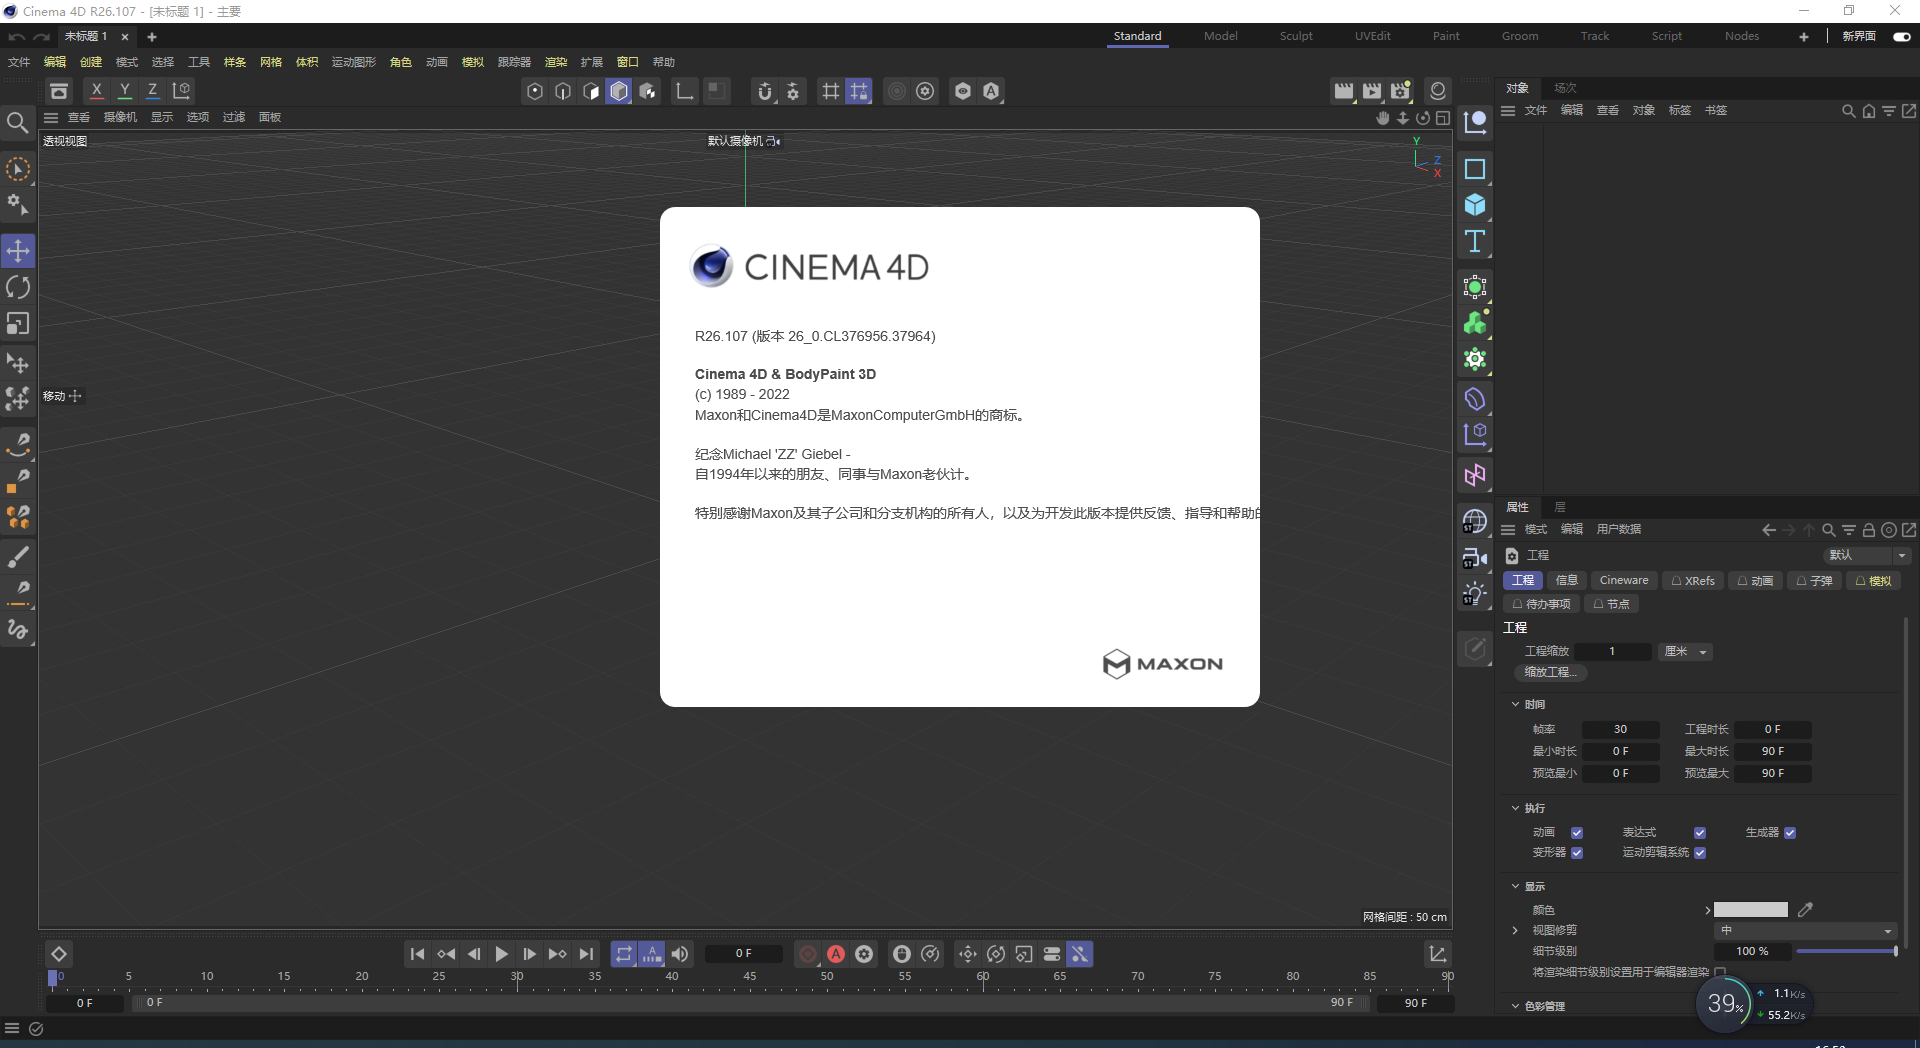 download the last version for android CINEMA 4D Studio R26.107 / 2024.0.2